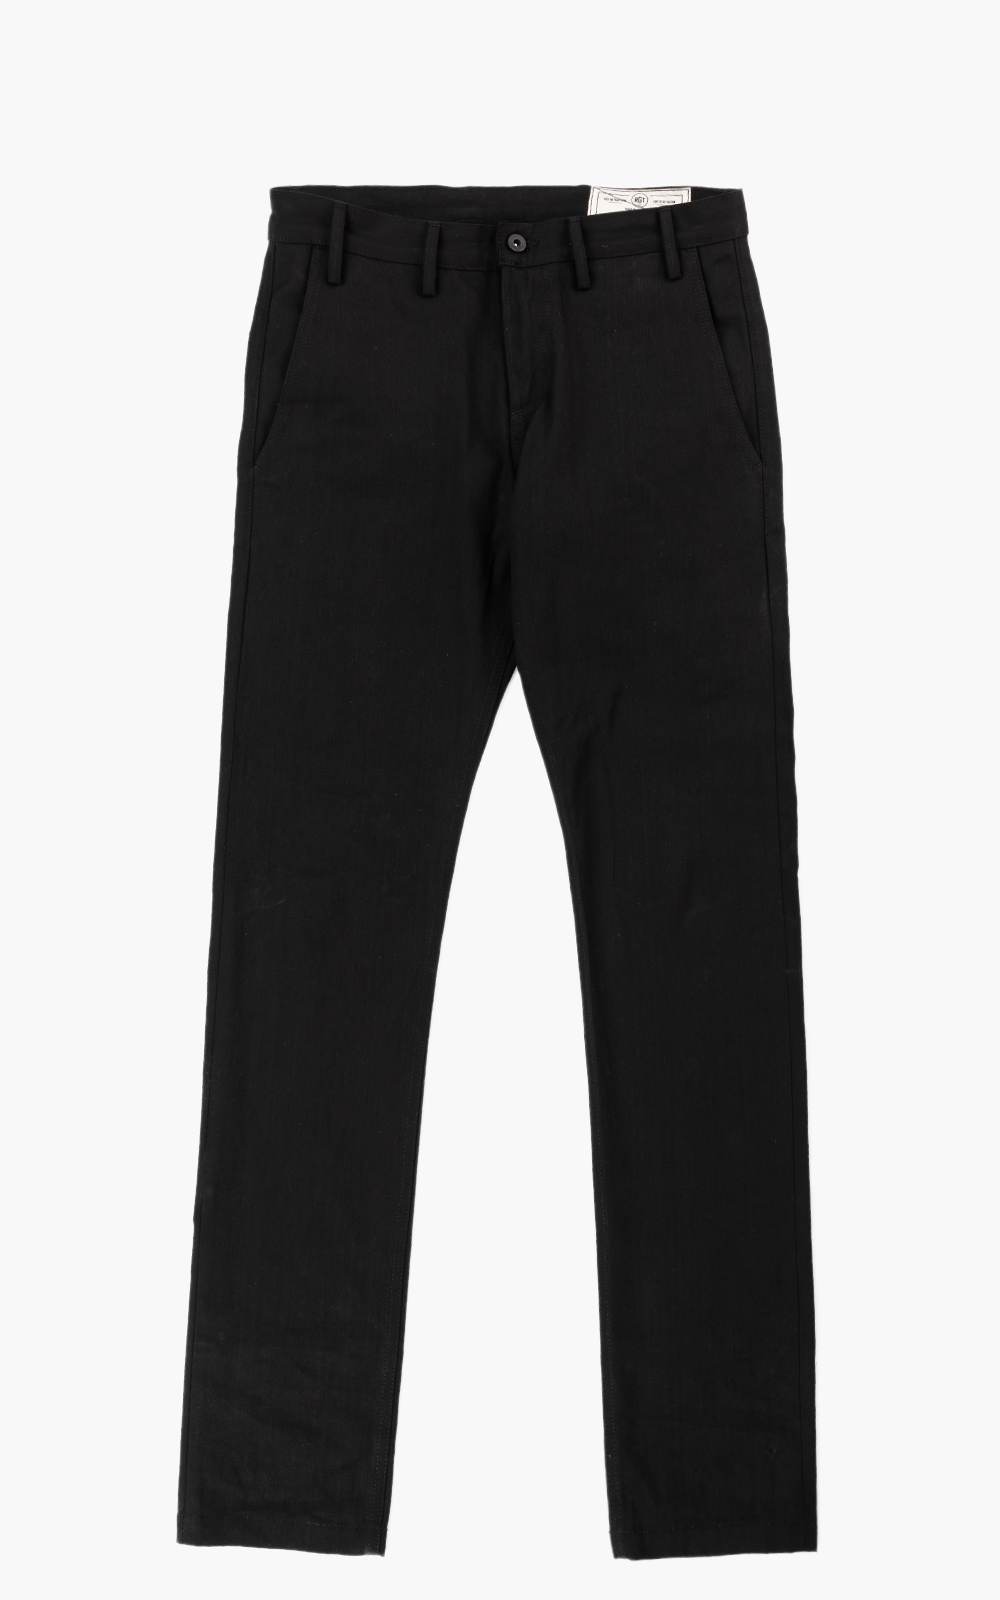 Rogue Territory Officer Trouser Stealth Black 11oz | Cultizm